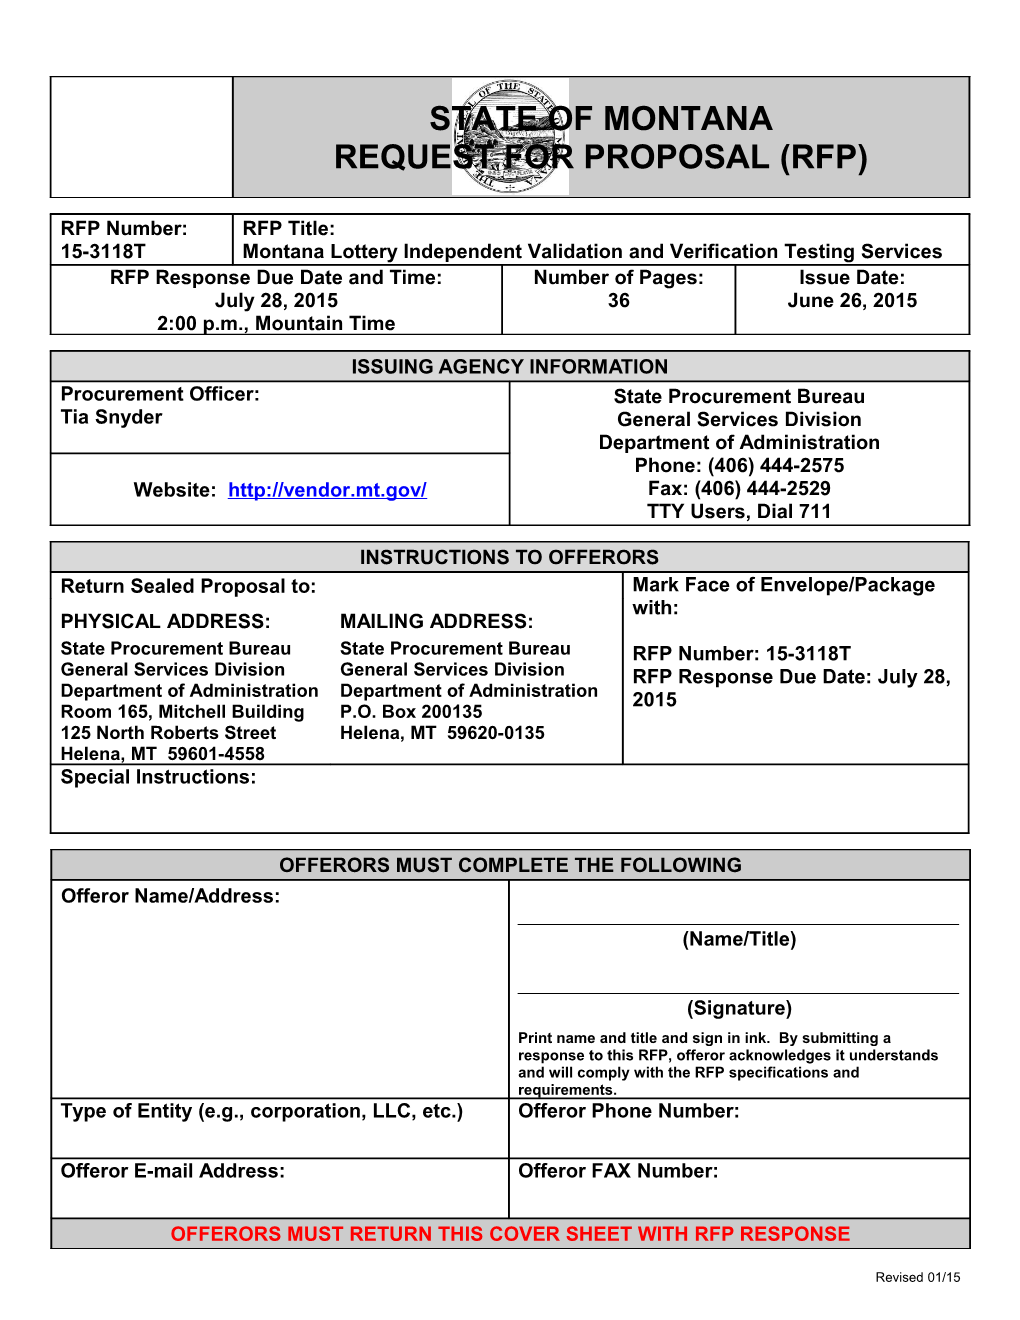 RFP15-3118T, Montana Lottery Independent Validation and Verification Testing Services, Page 1